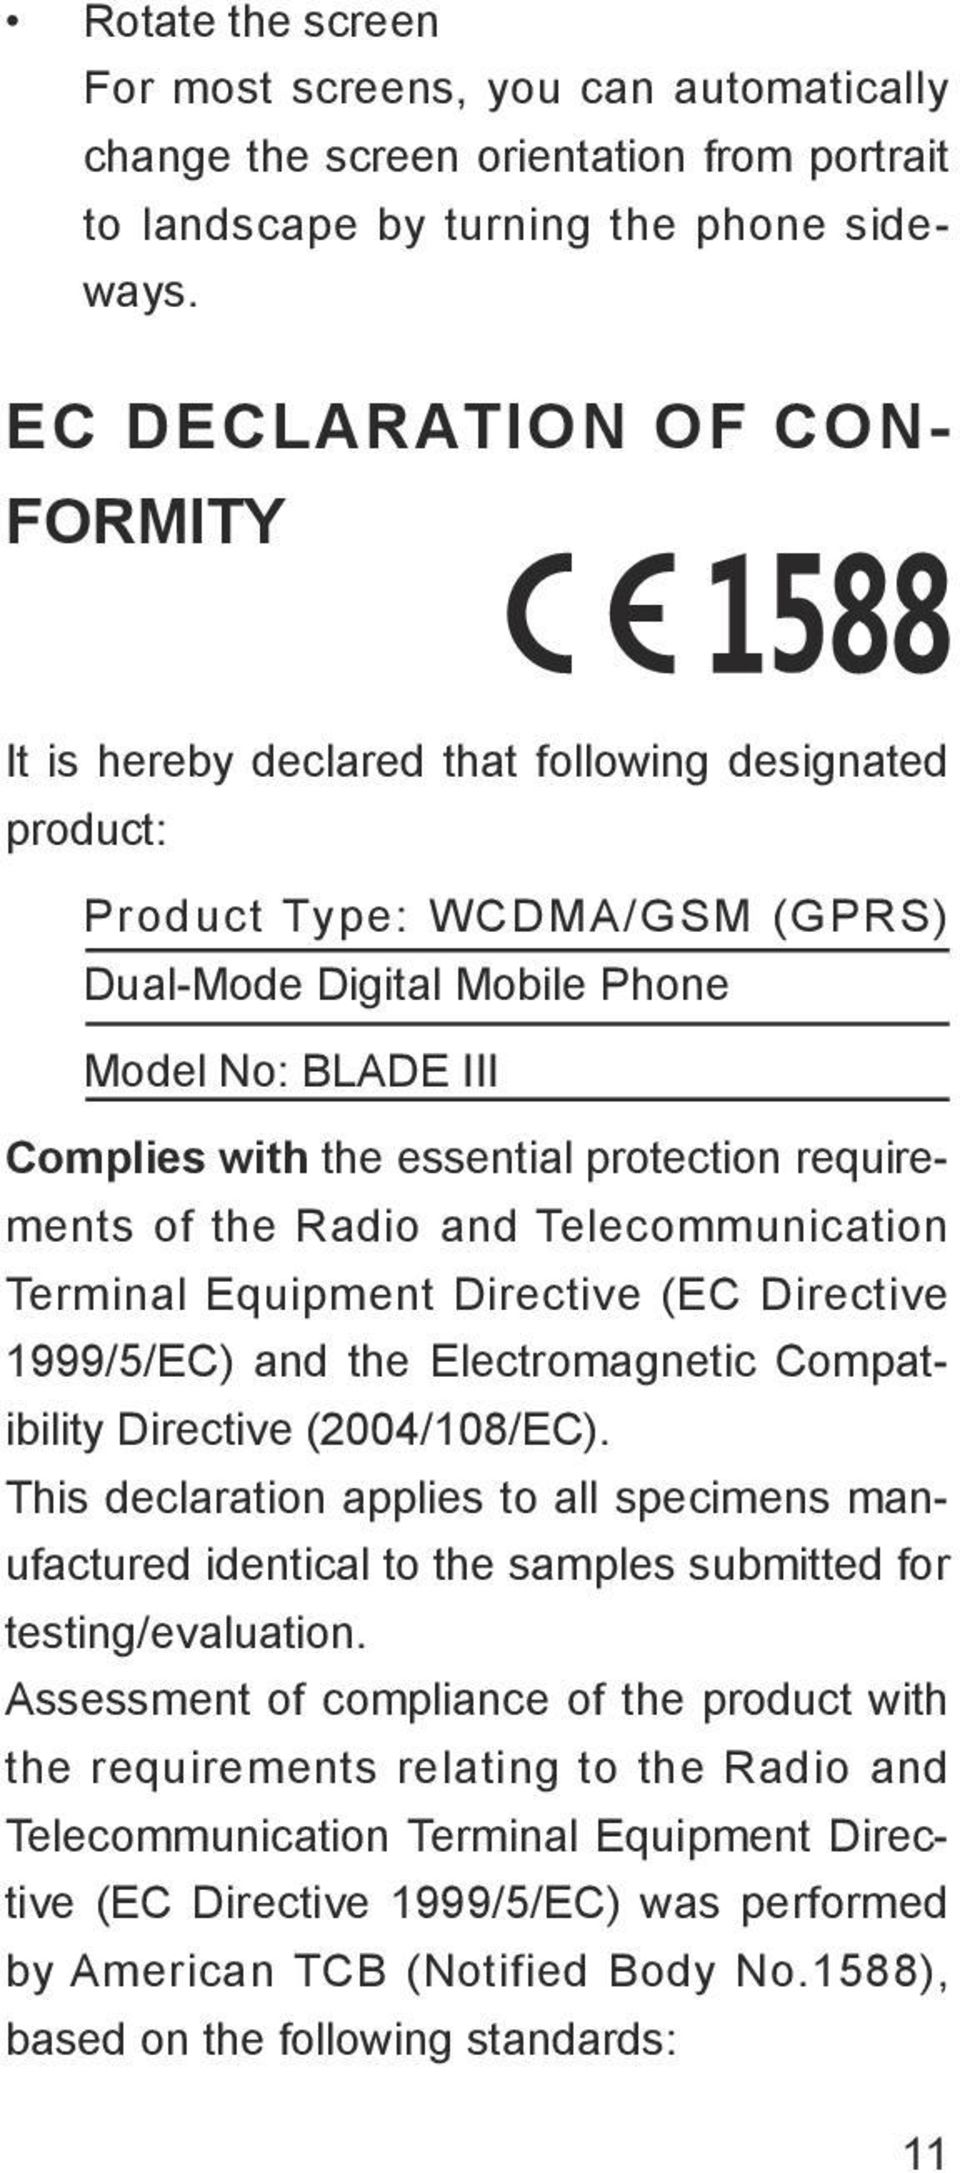 protection requirements of the Radio and Telecommunication Terminal Equipment Directive (EC Directive 1999/5/EC) and the Electromagnetic Compatibility Directive (2004/108/EC).